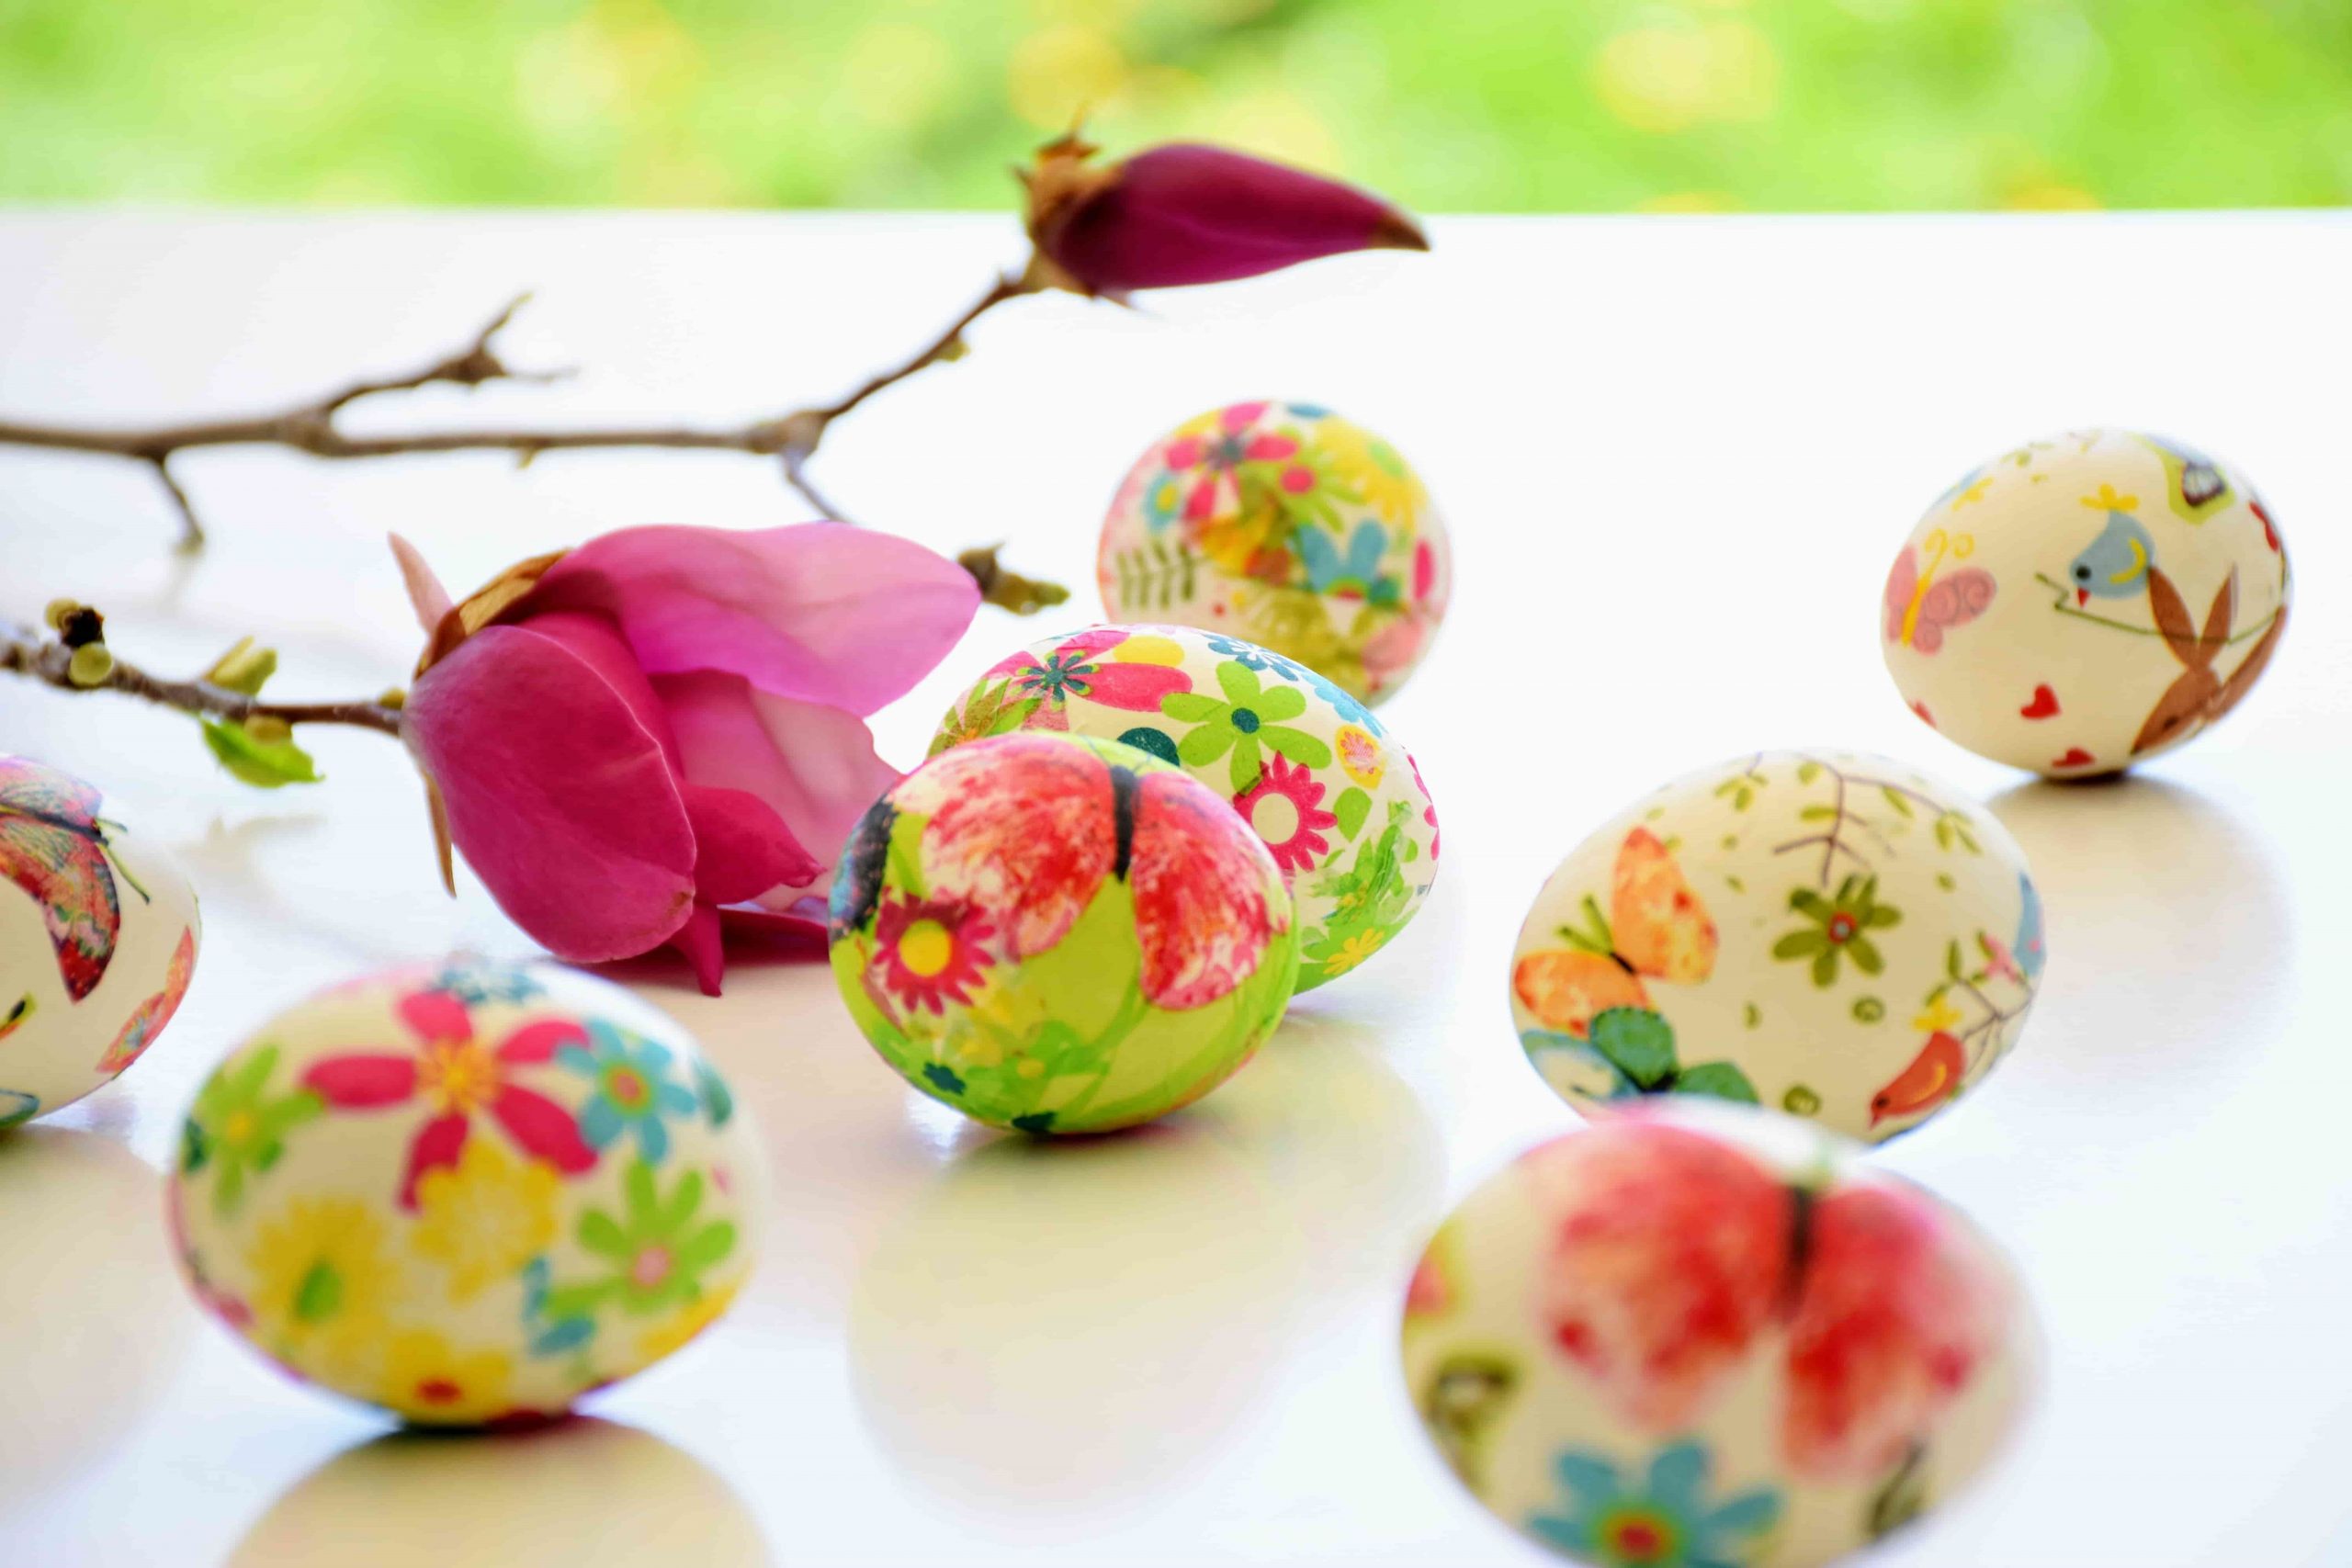 Painted eggs on table with flowers